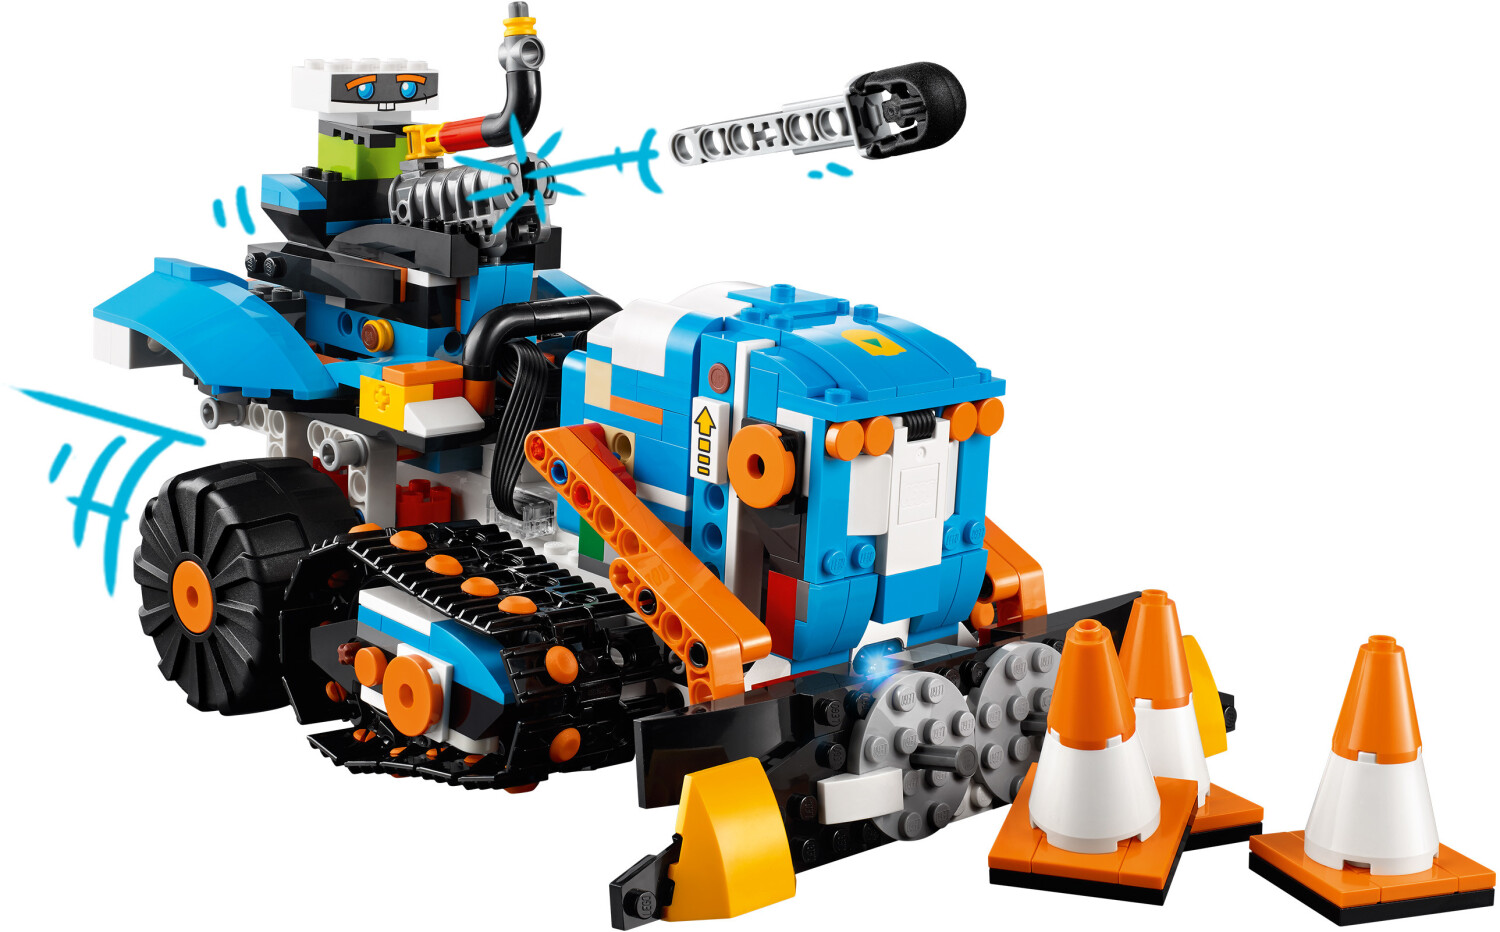 gåde resultat gardin Buy LEGO Boost - Creative Toolbox (17101) from £235.08 (Today) – Best Deals  on idealo.co.uk